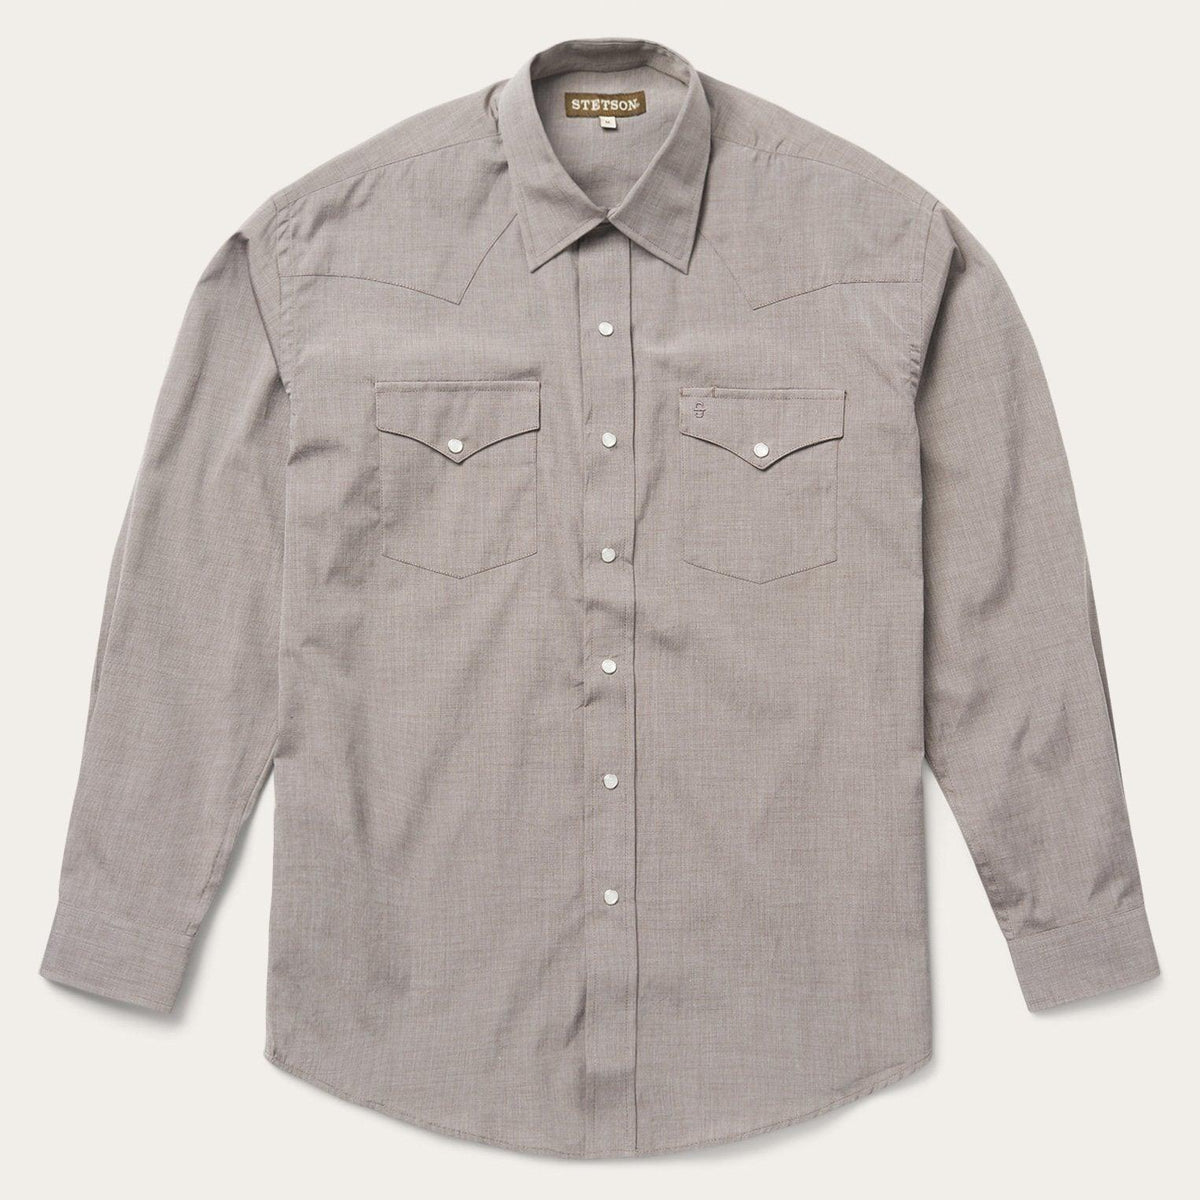 Stetson Classic Western Oxford Shirt in Brown - Flyclothing LLC